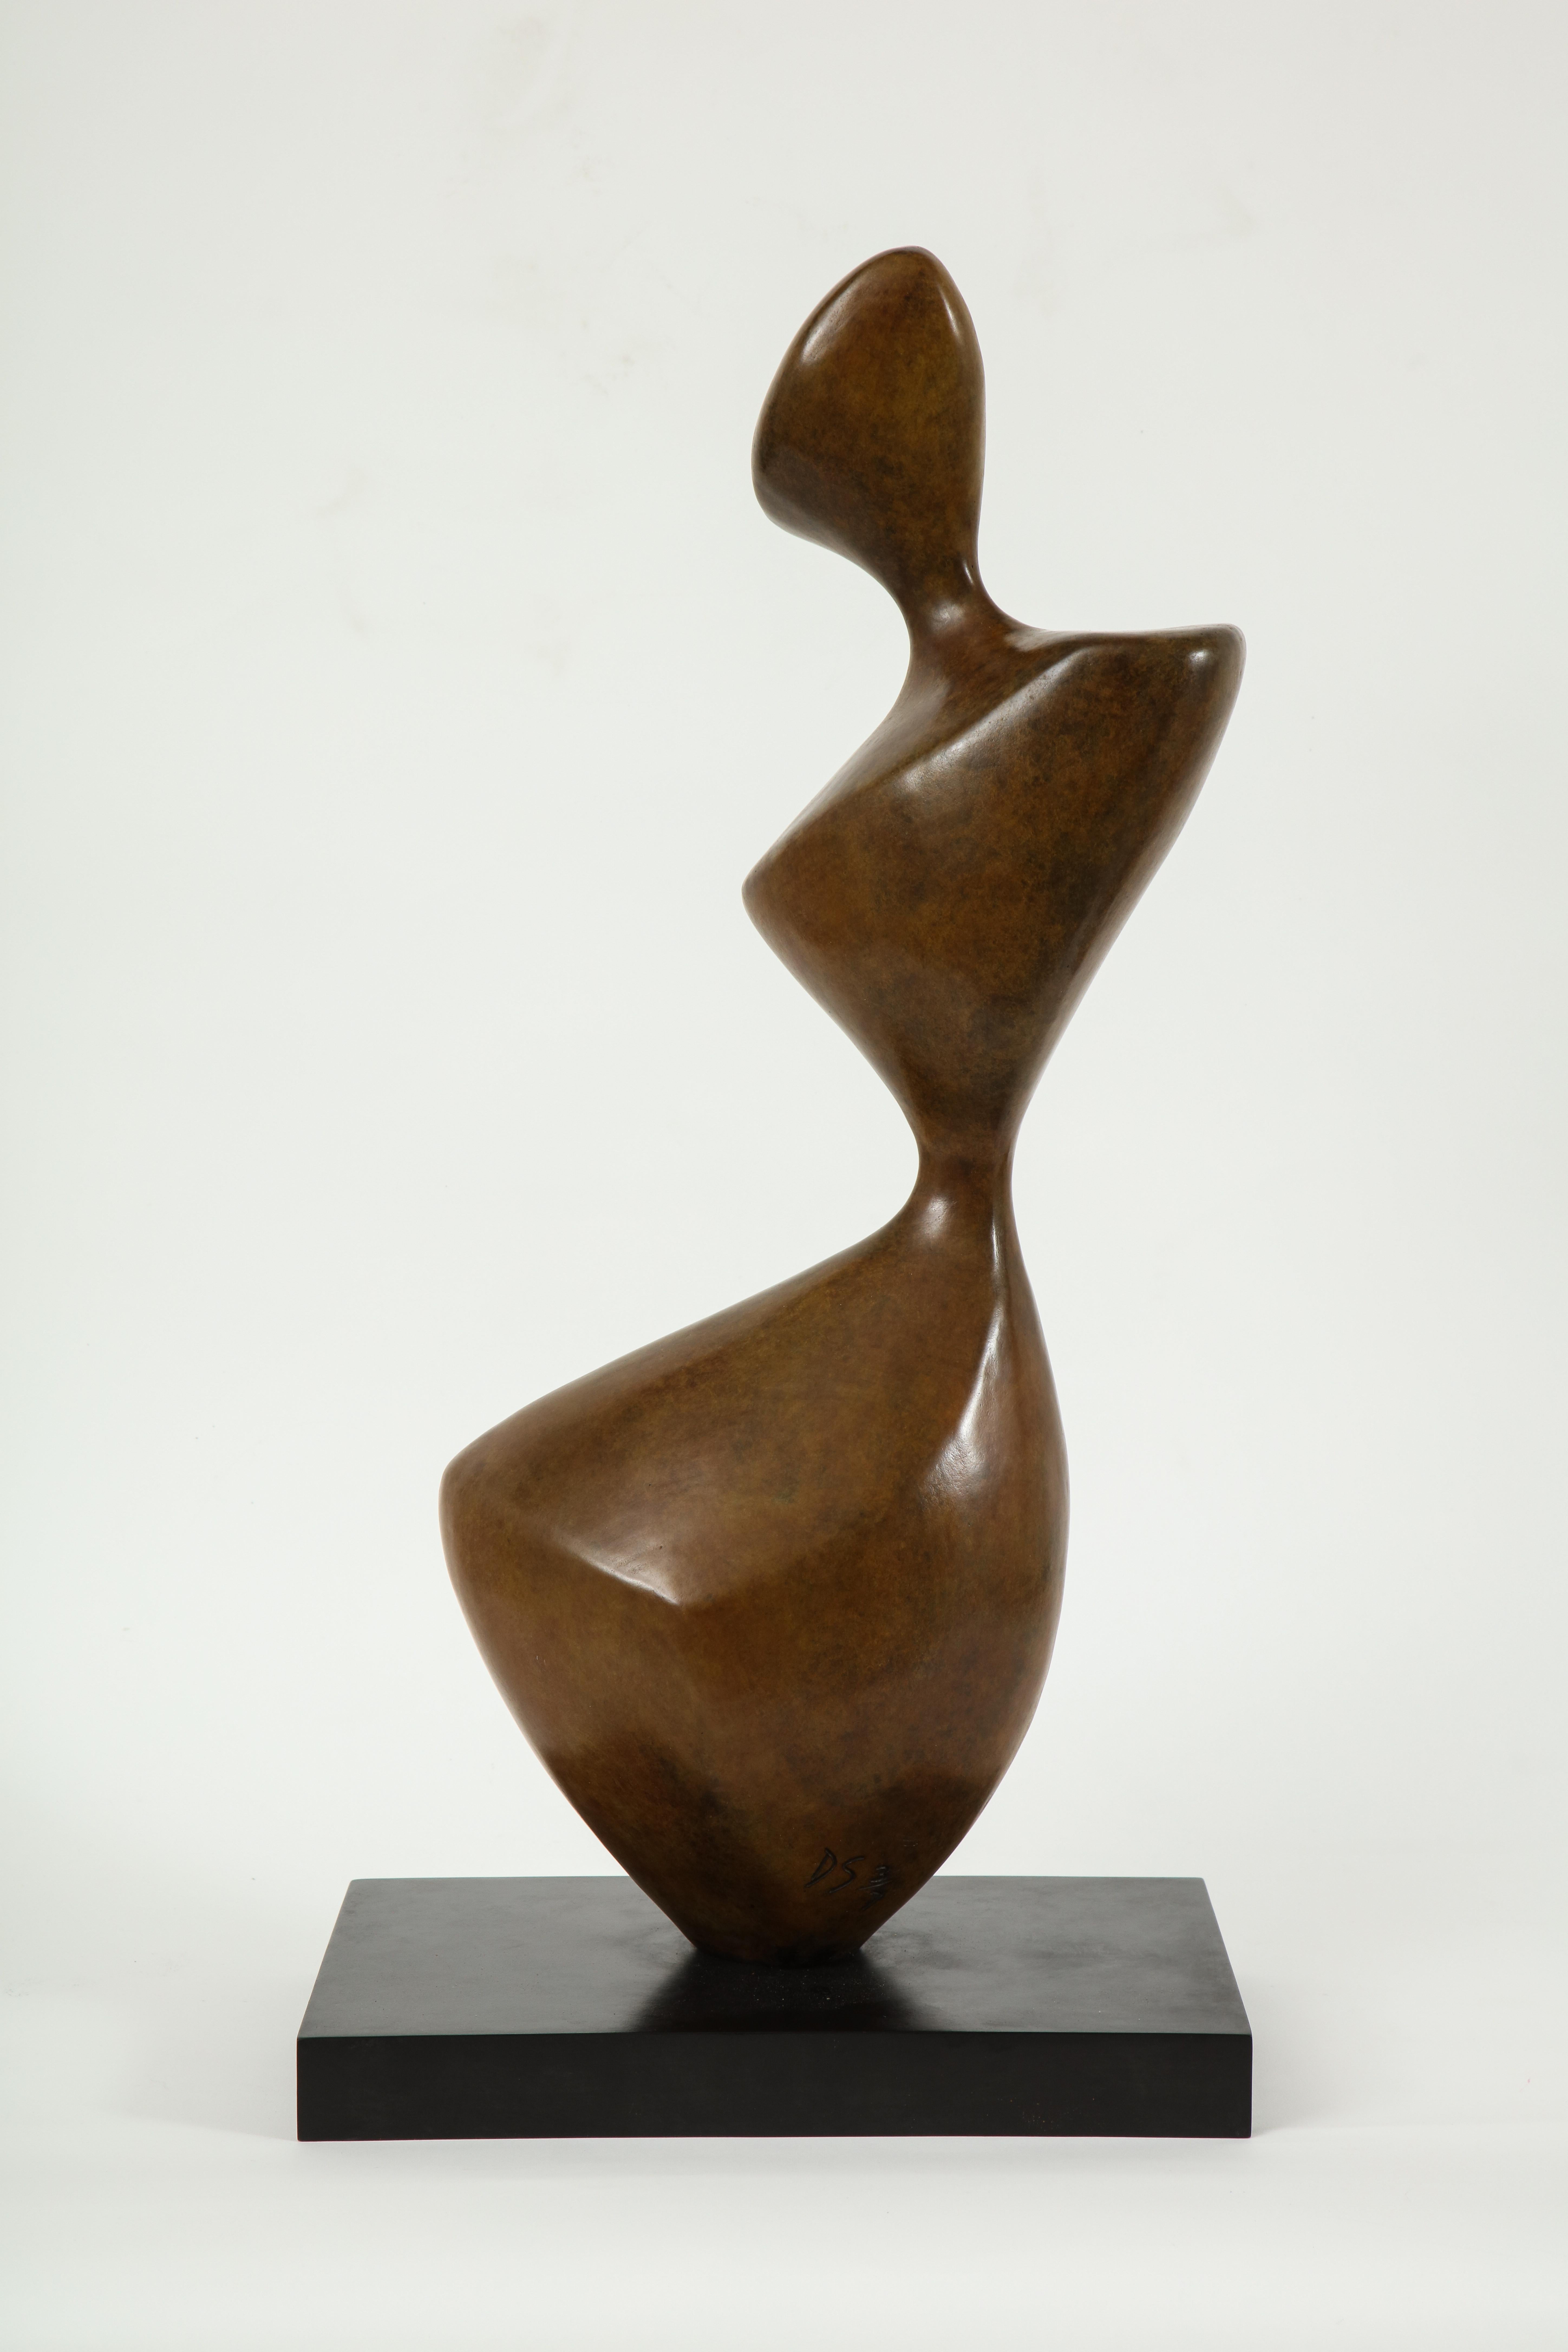 'Figure in Movement' by Dick Shanley
Edition 3/7 
Medium: Cast bronze 
Signed: DS 3/7 
Size: Overall height: 29 3/4